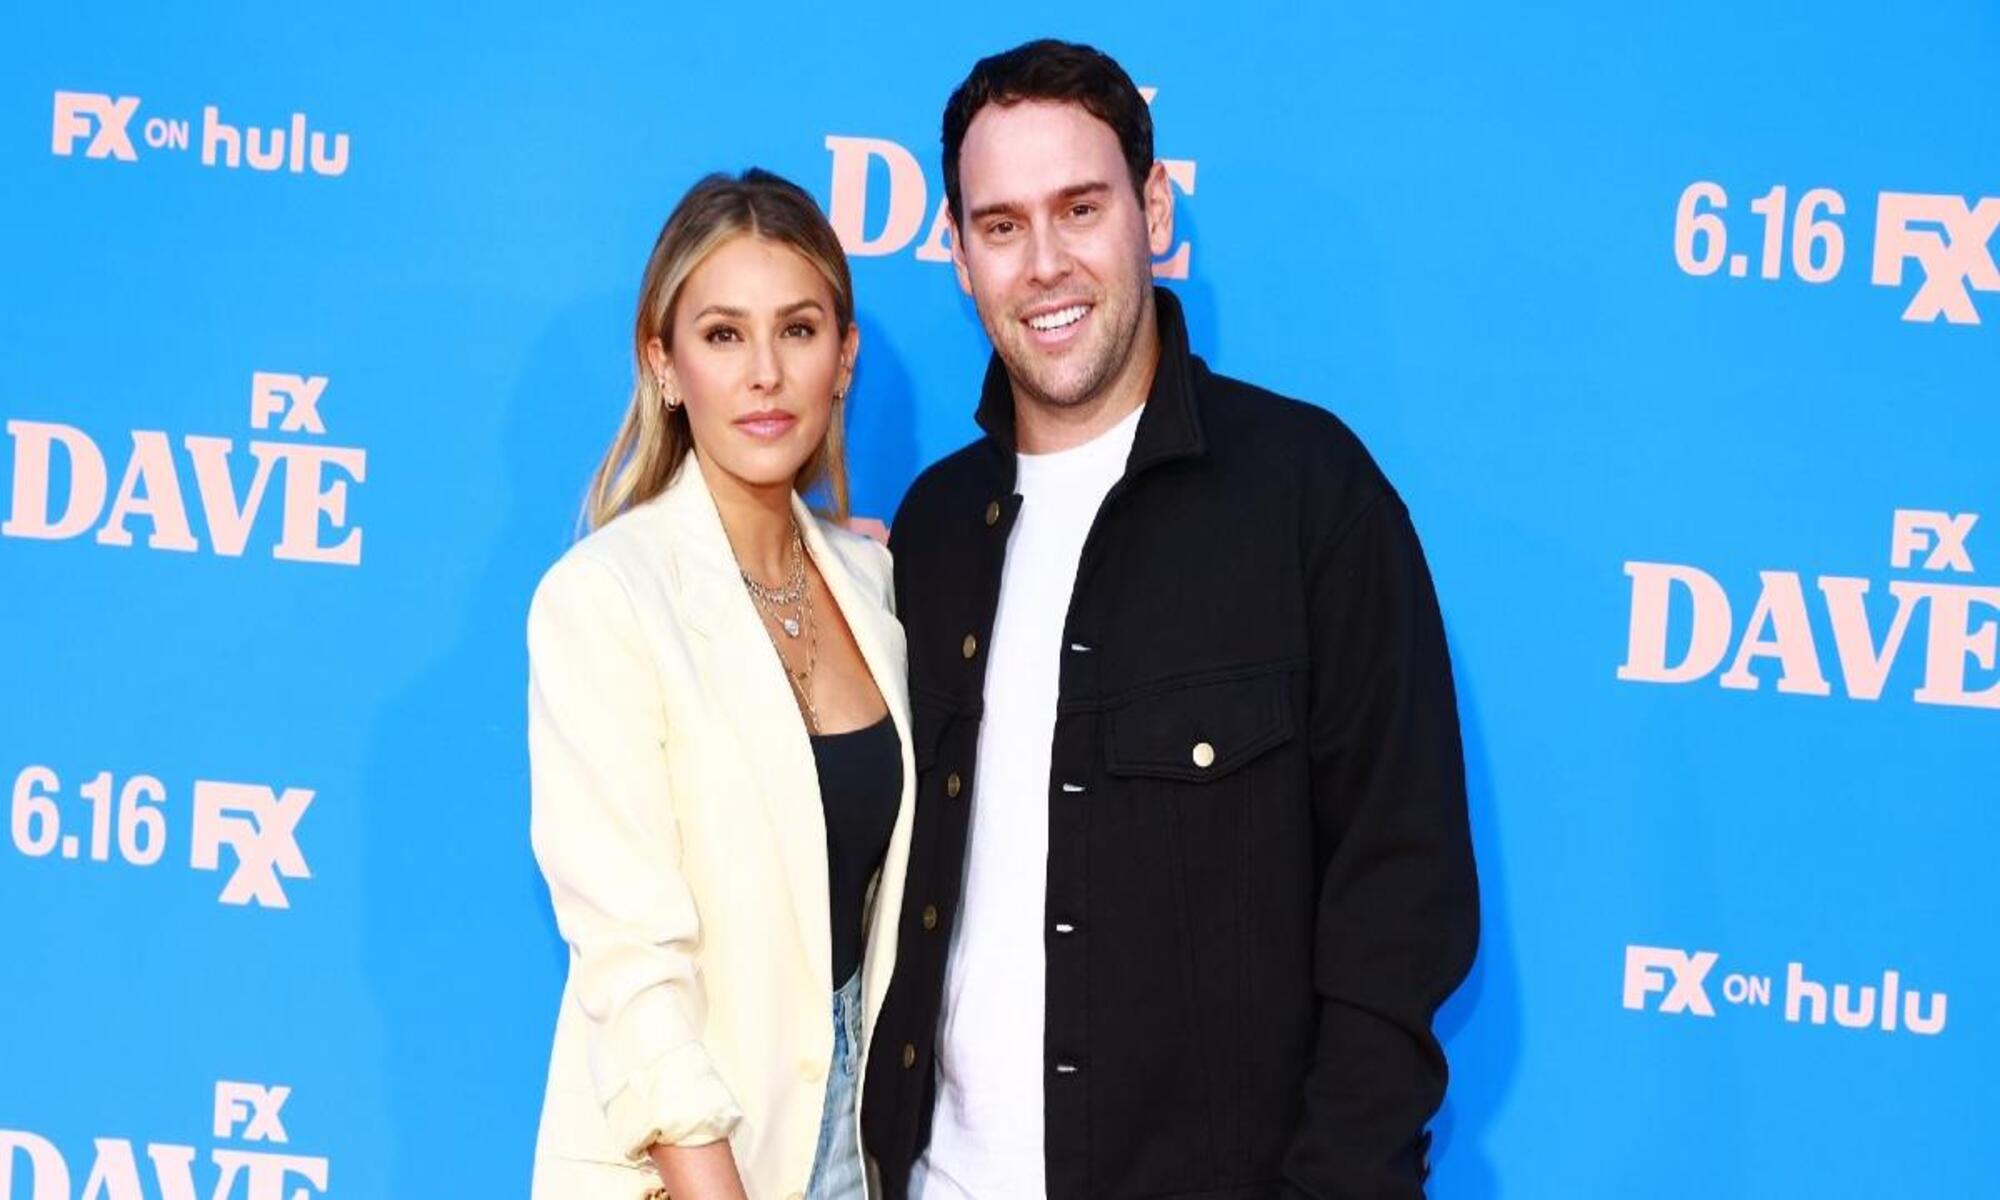 Scooter Braun allegedly cheated on wife with Erika Jayne.